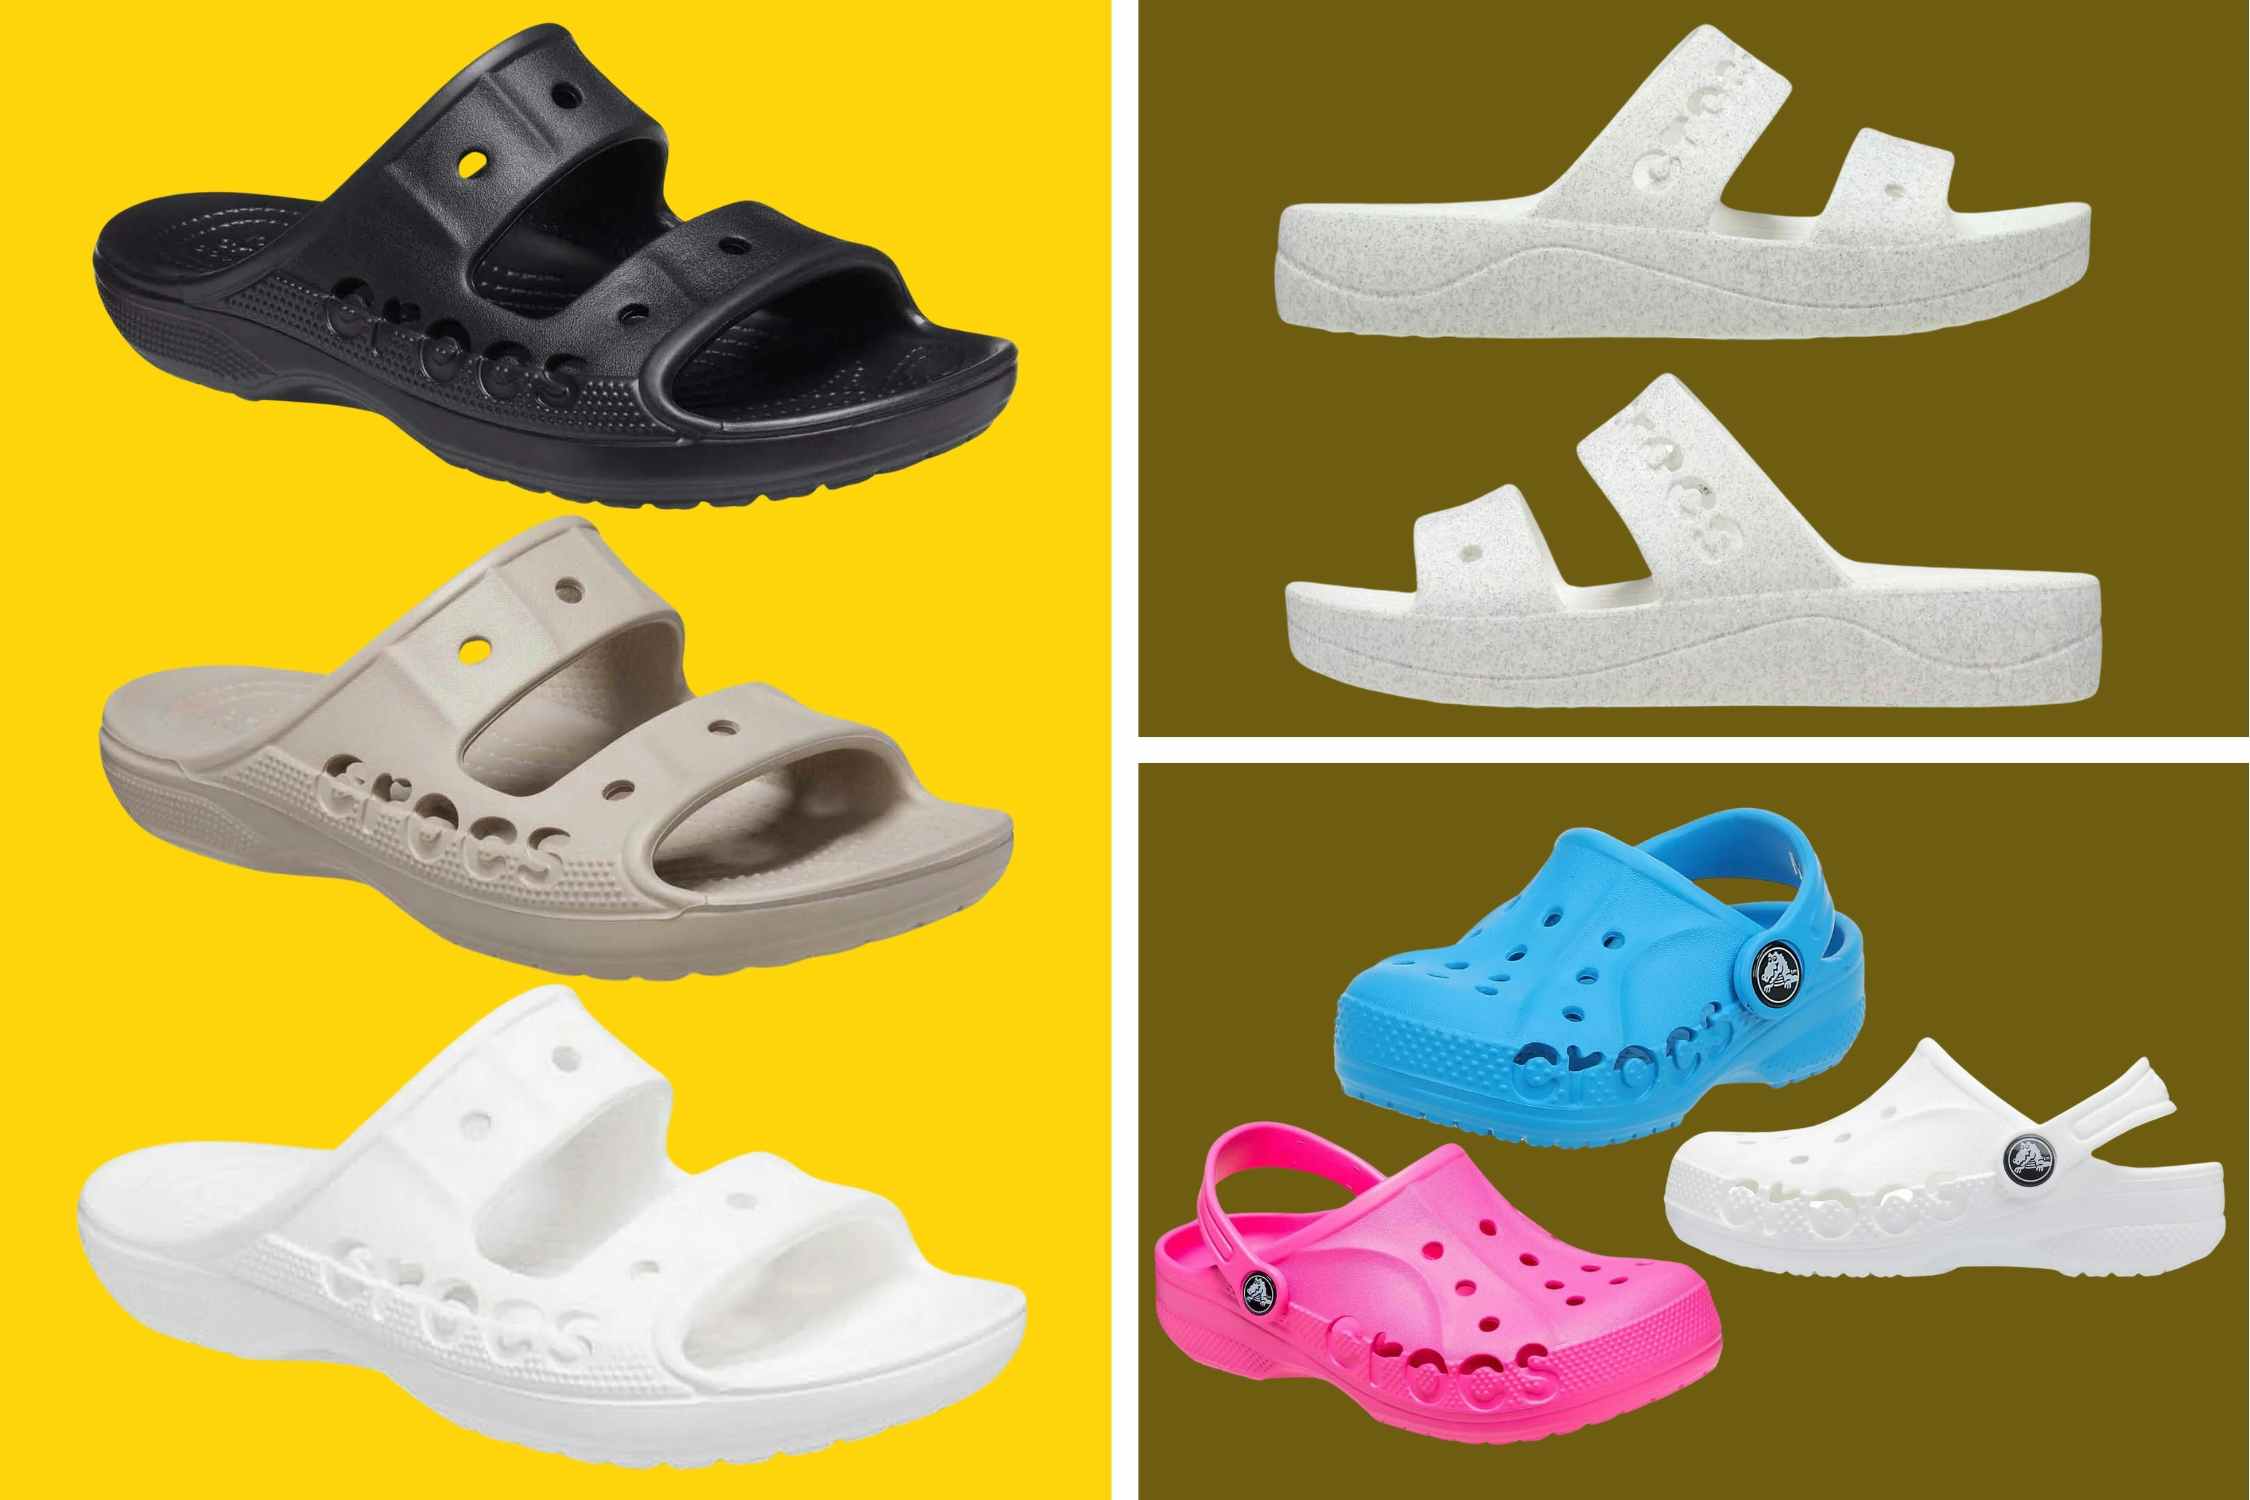 Discounted Crocs at Walmart: $11 Sandals, $17 Clogs, and More